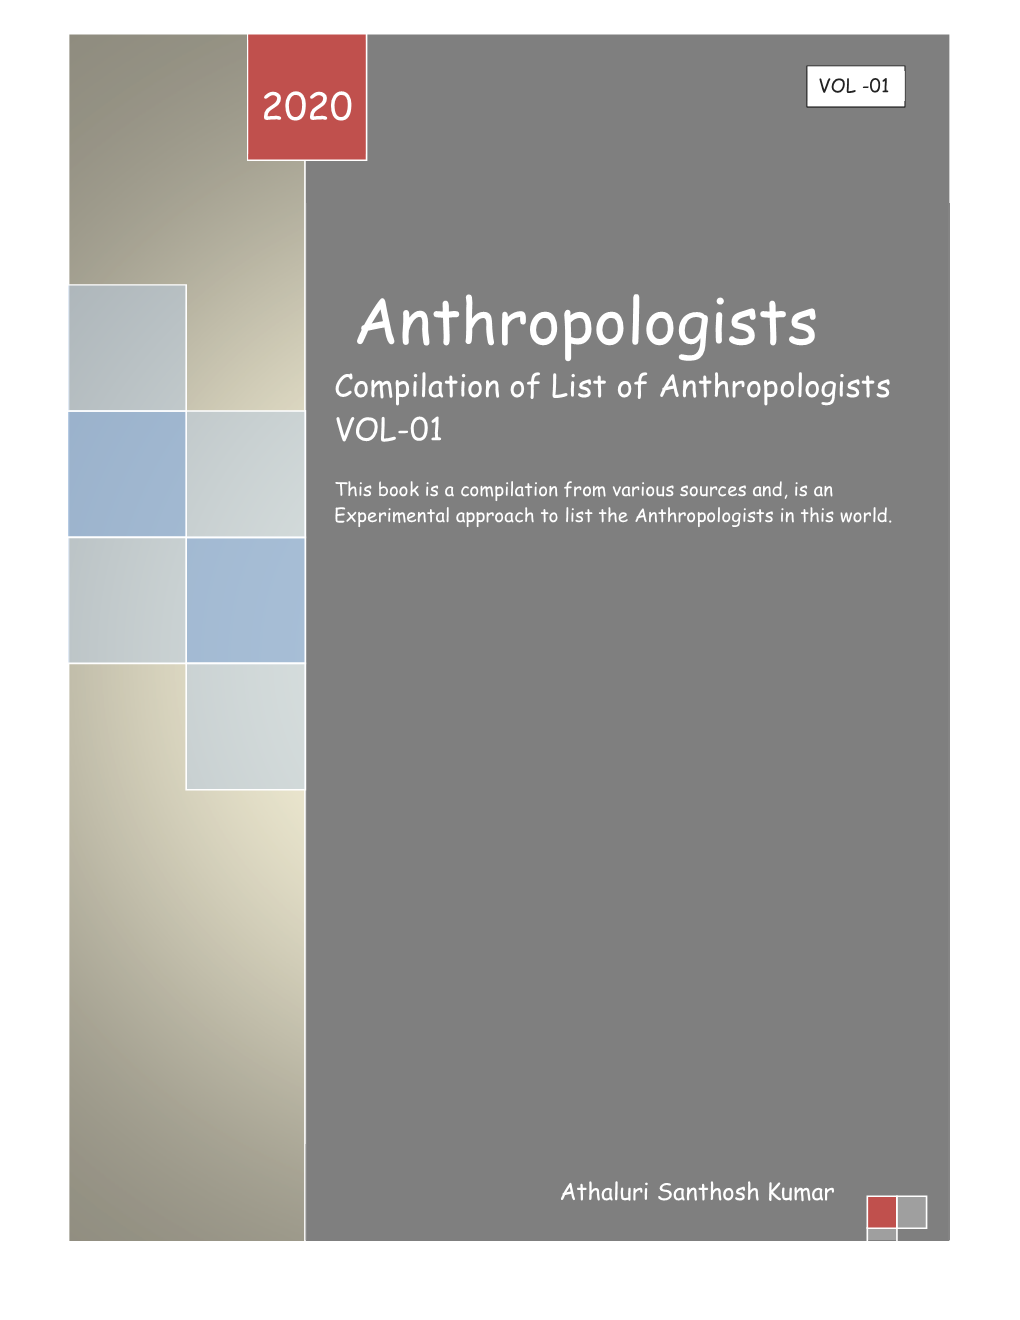 Anthropologists Compilation of List of Anthropologists VOL-01